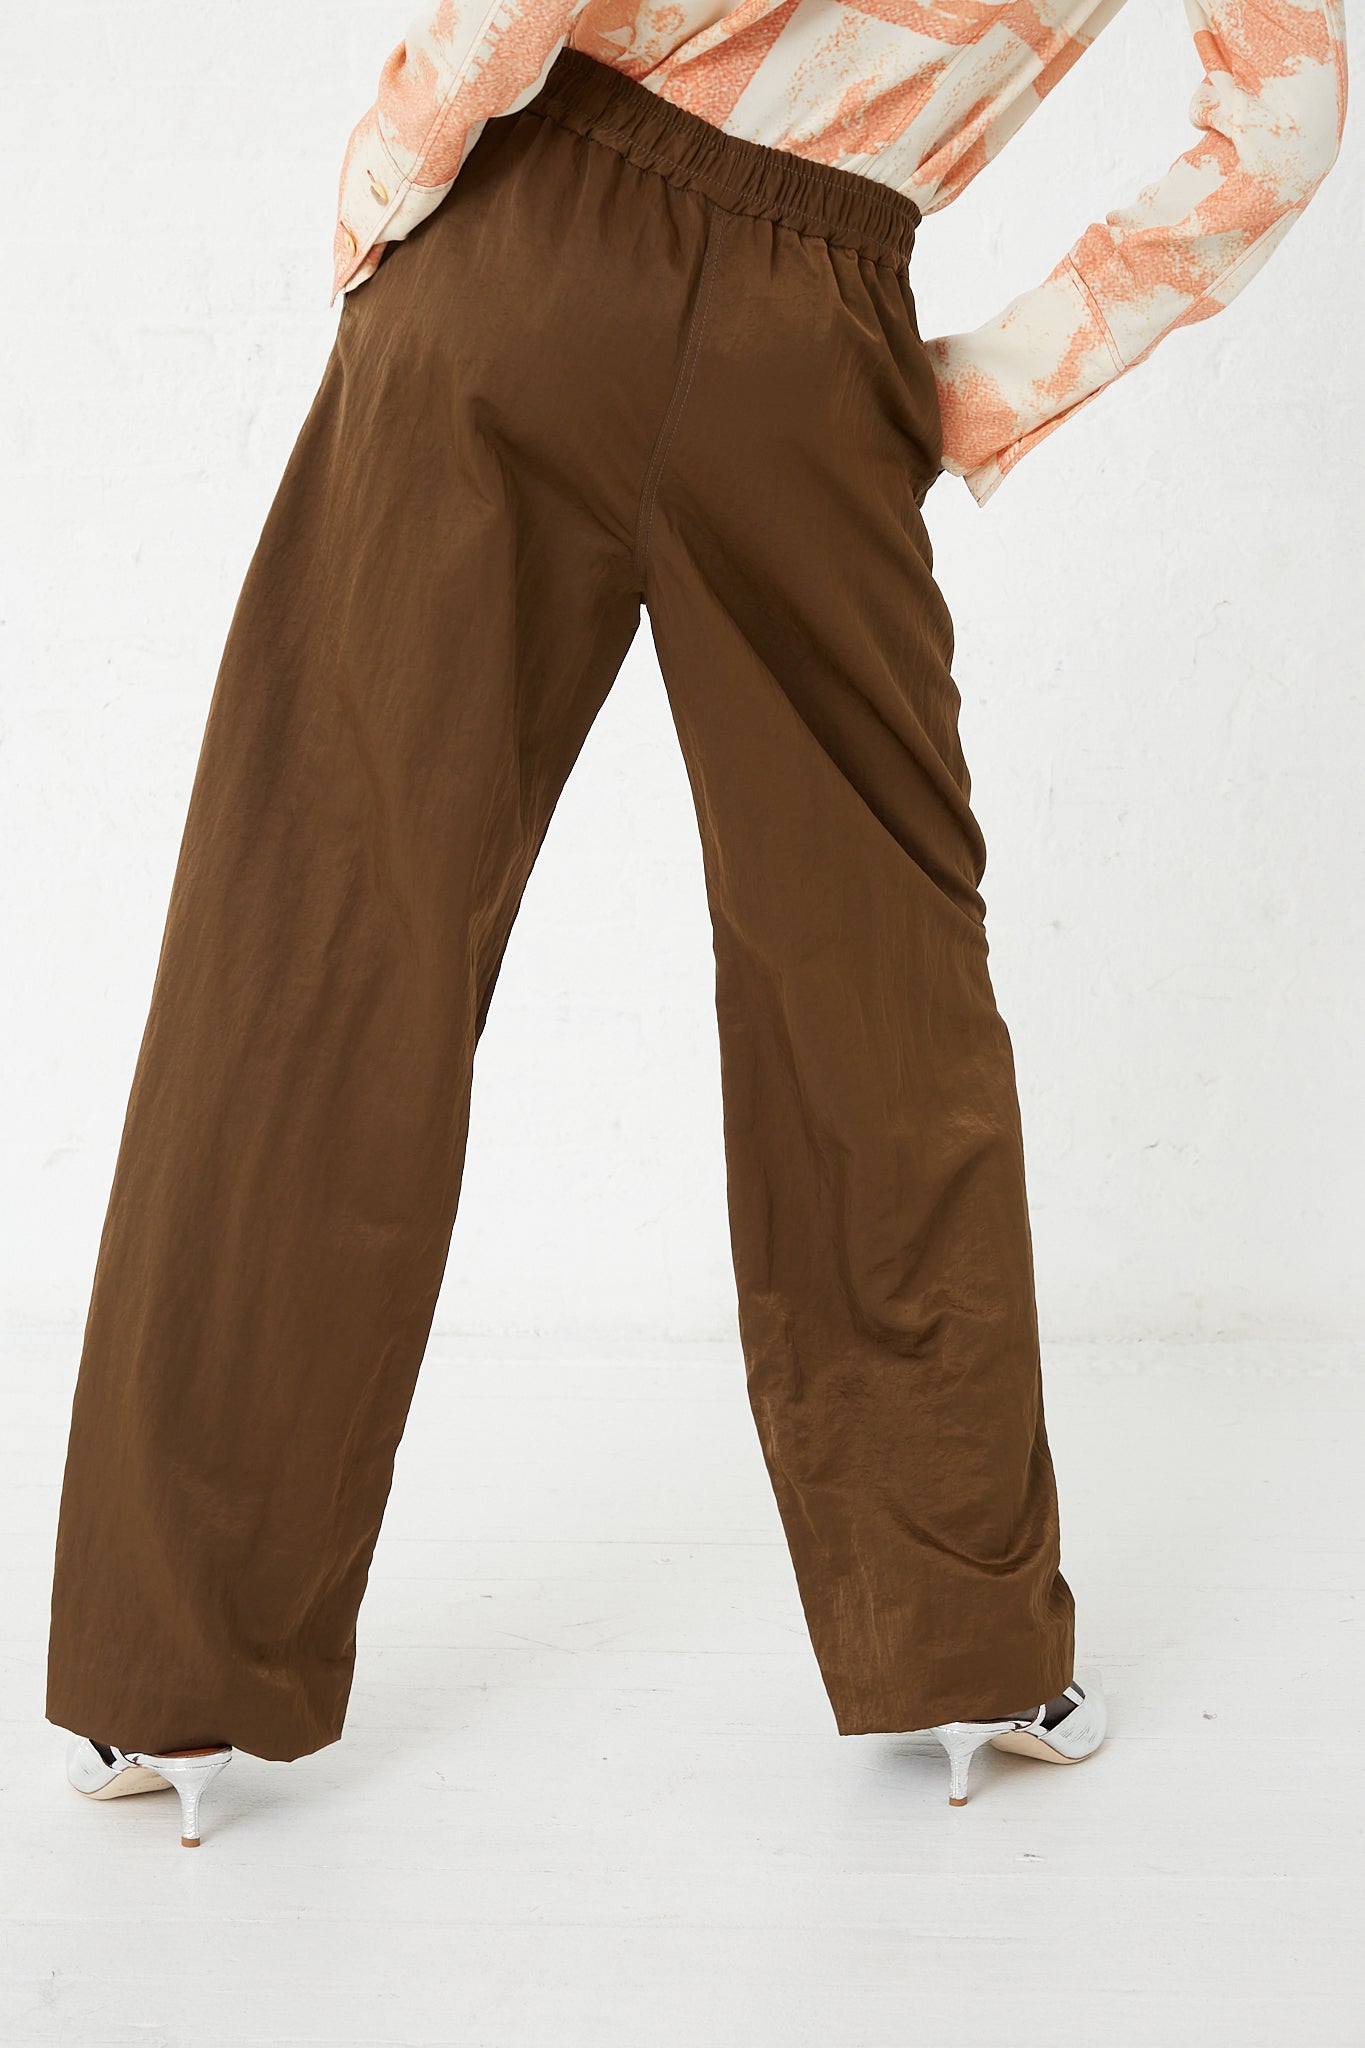 A woman is standing in a pair of Rejina Pyo's Nylon Una Trousers in Brown with an elasticated waist.